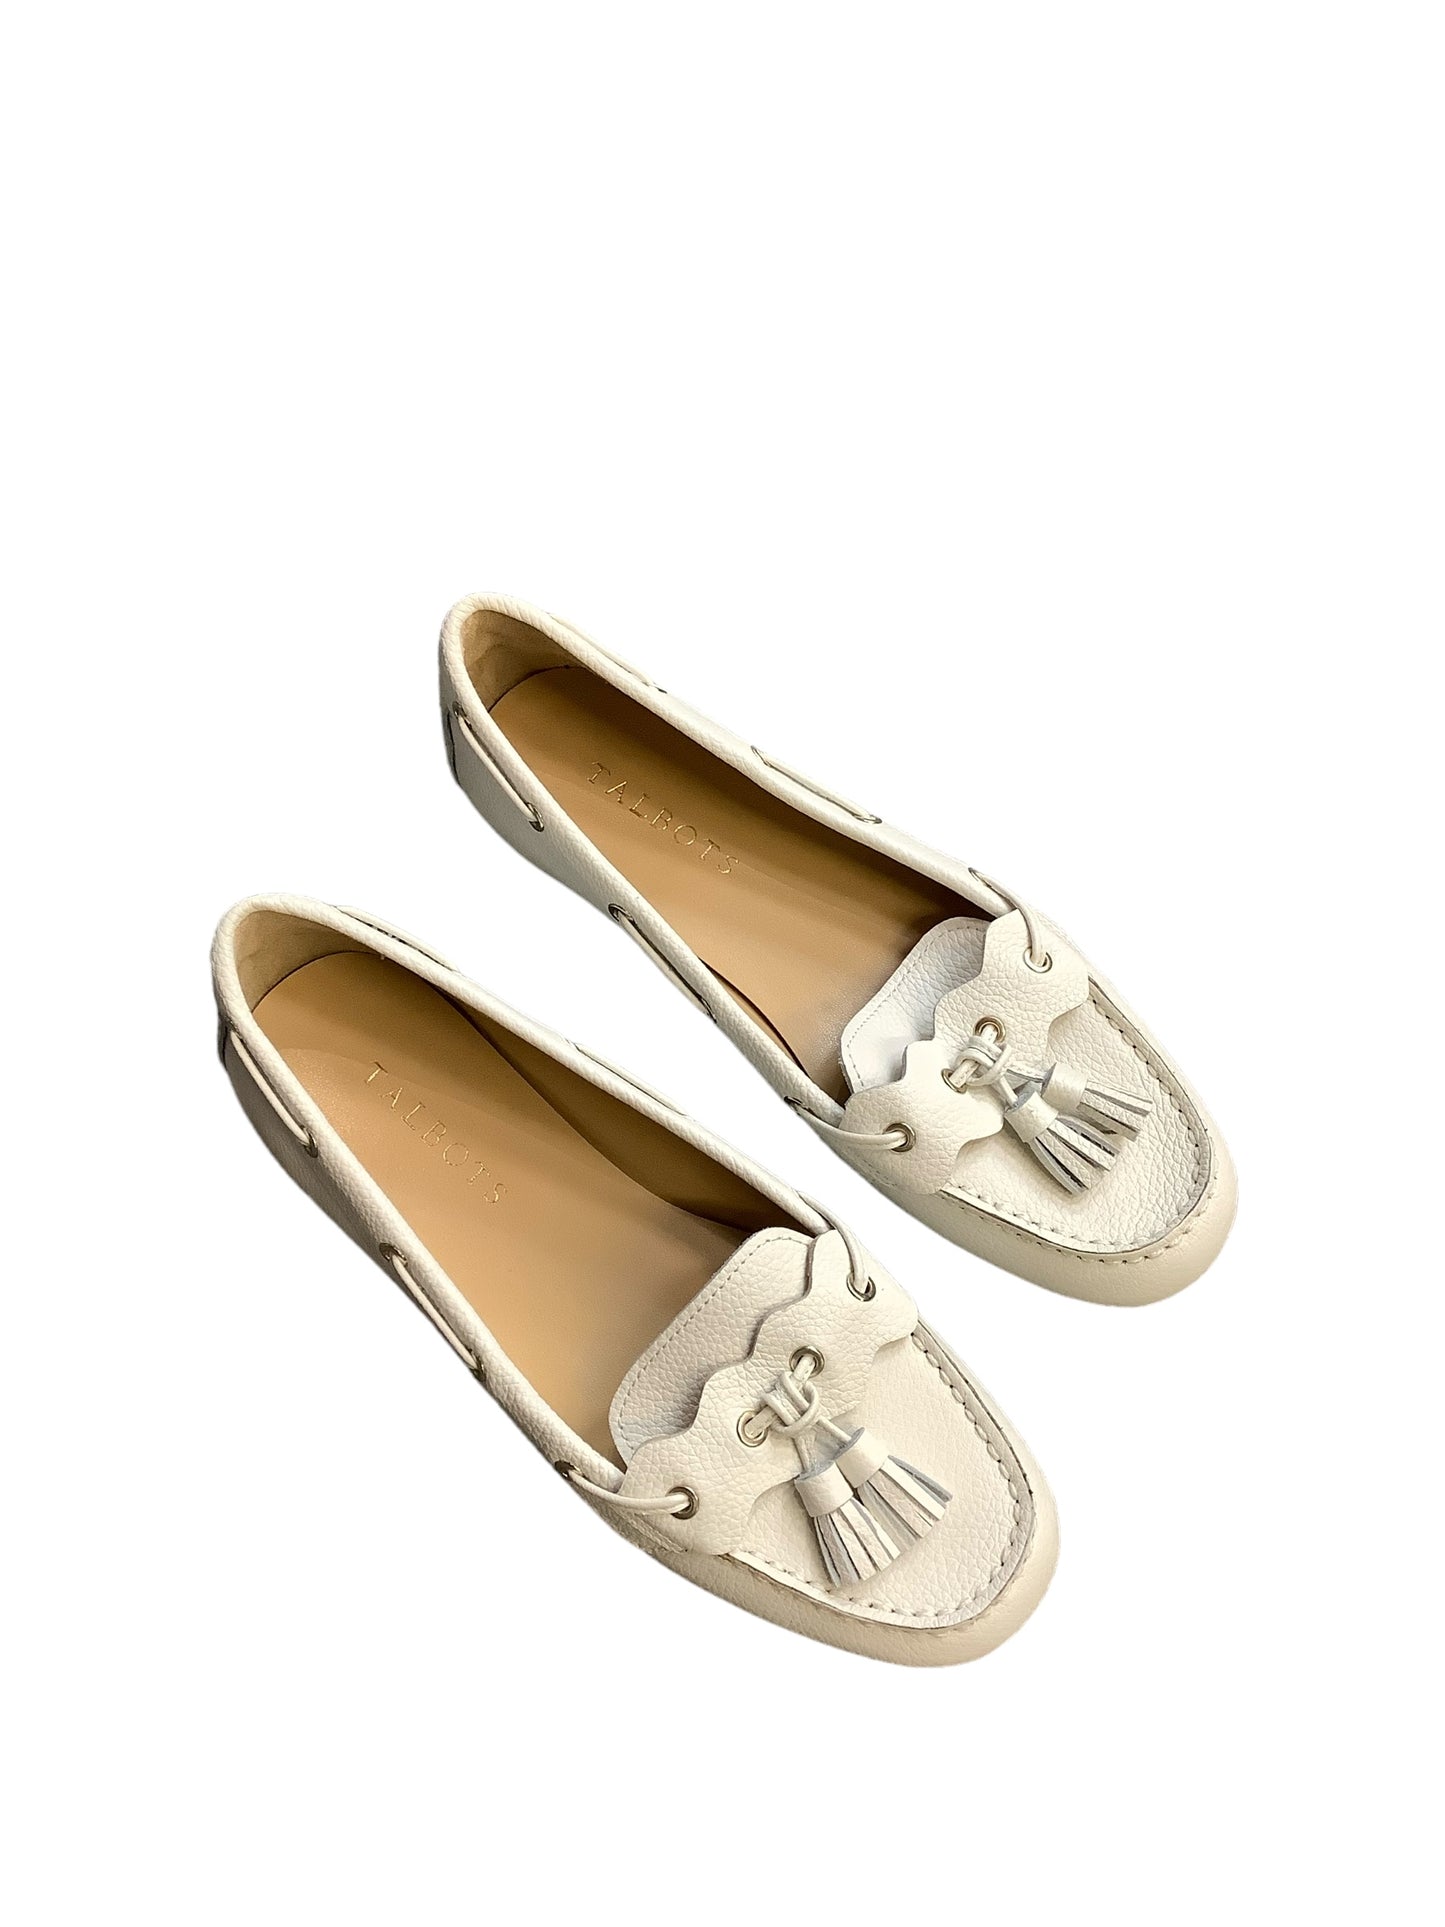 Shoes Flats Boat By Michael Kors  Size: 6.5